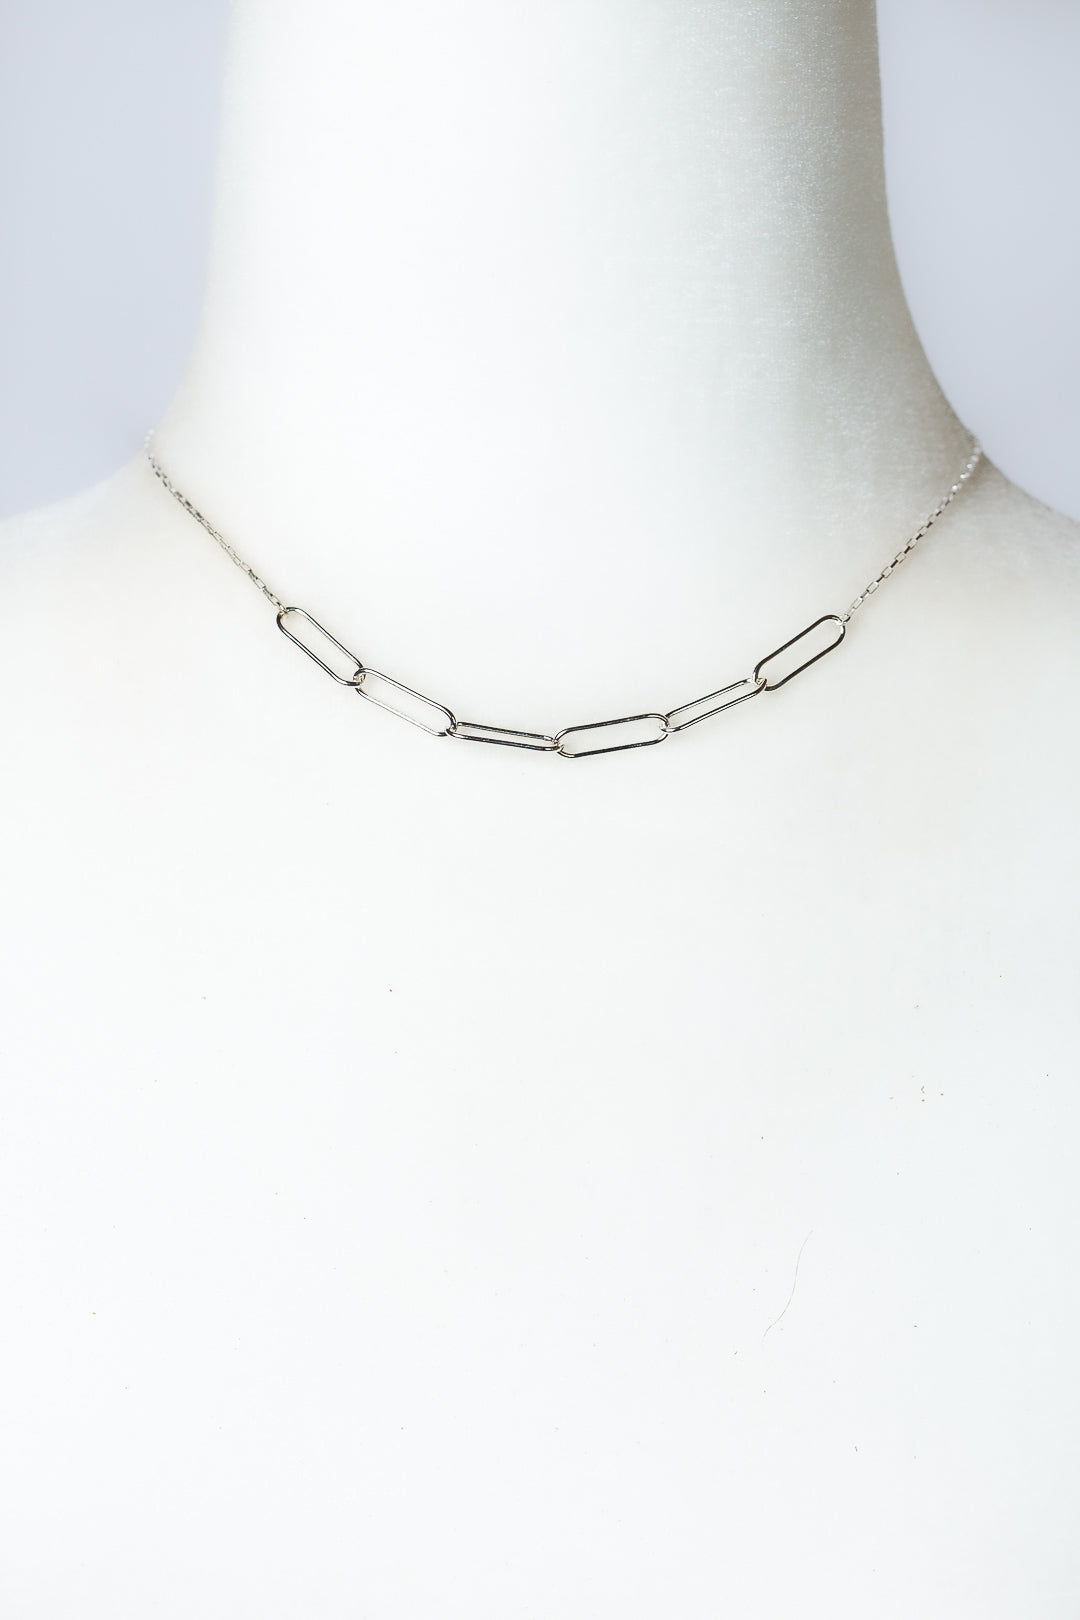 Simplicity 16-18" Sterling Silver Paperclip Simple Necklace